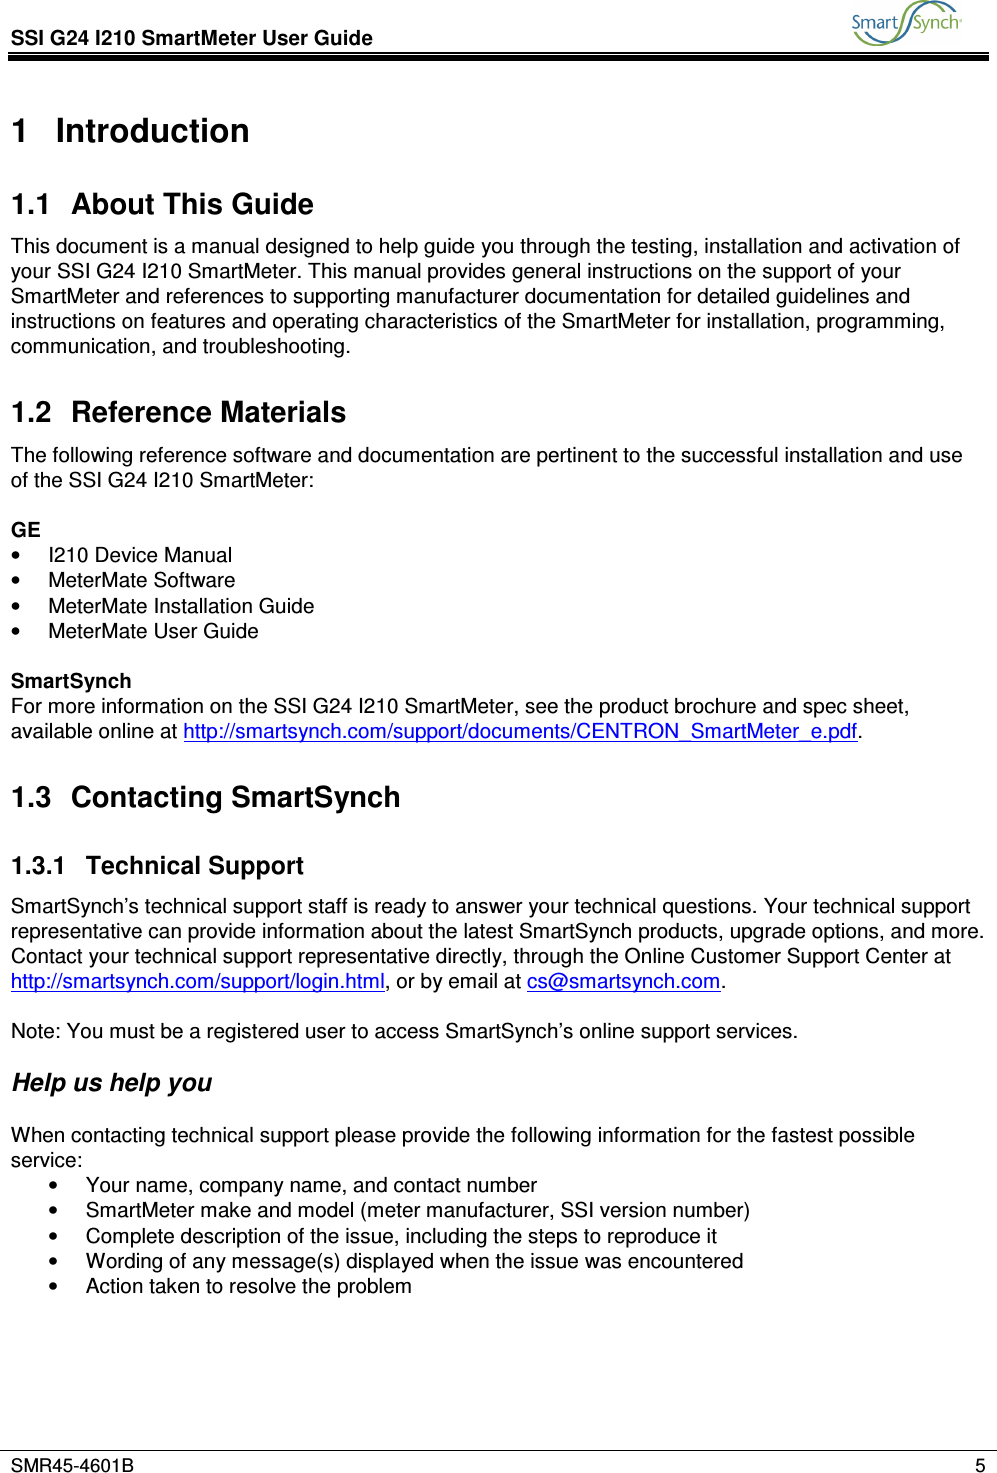 SSI G24 I210 SmartMeter User Guide           SMR45-4601B    5  1  Introduction 1.1  About This Guide This document is a manual designed to help guide you through the testing, installation and activation of your SSI G24 I210 SmartMeter. This manual provides general instructions on the support of your SmartMeter and references to supporting manufacturer documentation for detailed guidelines and instructions on features and operating characteristics of the SmartMeter for installation, programming, communication, and troubleshooting. 1.2  Reference Materials The following reference software and documentation are pertinent to the successful installation and use of the SSI G24 I210 SmartMeter:   GE •  I210 Device Manual •  MeterMate Software •  MeterMate Installation Guide •  MeterMate User Guide  SmartSynch For more information on the SSI G24 I210 SmartMeter, see the product brochure and spec sheet, available online at http://smartsynch.com/support/documents/CENTRON_SmartMeter_e.pdf. 1.3  Contacting SmartSynch 1.3.1  Technical Support SmartSynch’s technical support staff is ready to answer your technical questions. Your technical support representative can provide information about the latest SmartSynch products, upgrade options, and more. Contact your technical support representative directly, through the Online Customer Support Center at http://smartsynch.com/support/login.html, or by email at cs@smartsynch.com.  Note: You must be a registered user to access SmartSynch’s online support services.   Help us help you  When contacting technical support please provide the following information for the fastest possible service: •  Your name, company name, and contact number •  SmartMeter make and model (meter manufacturer, SSI version number) •  Complete description of the issue, including the steps to reproduce it •  Wording of any message(s) displayed when the issue was encountered •  Action taken to resolve the problem